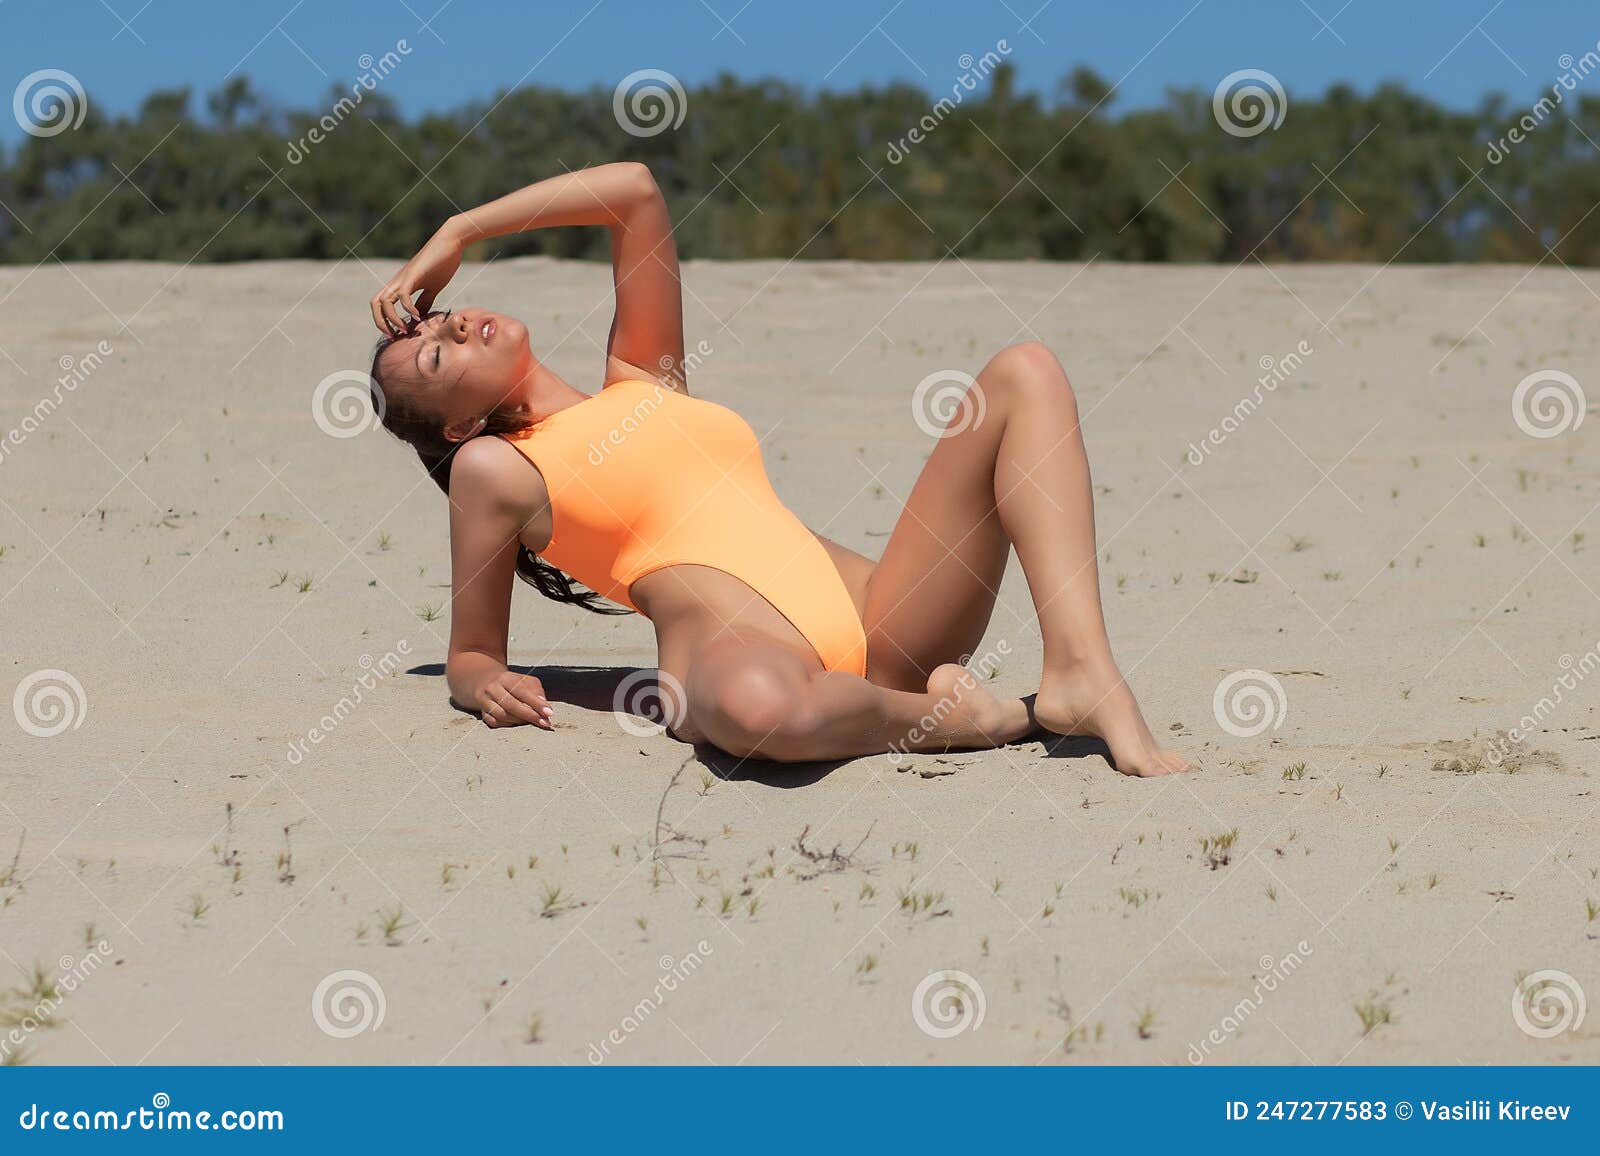 Attractive Woman in Swimsuit Relaxing on Beach Stock Image - Image